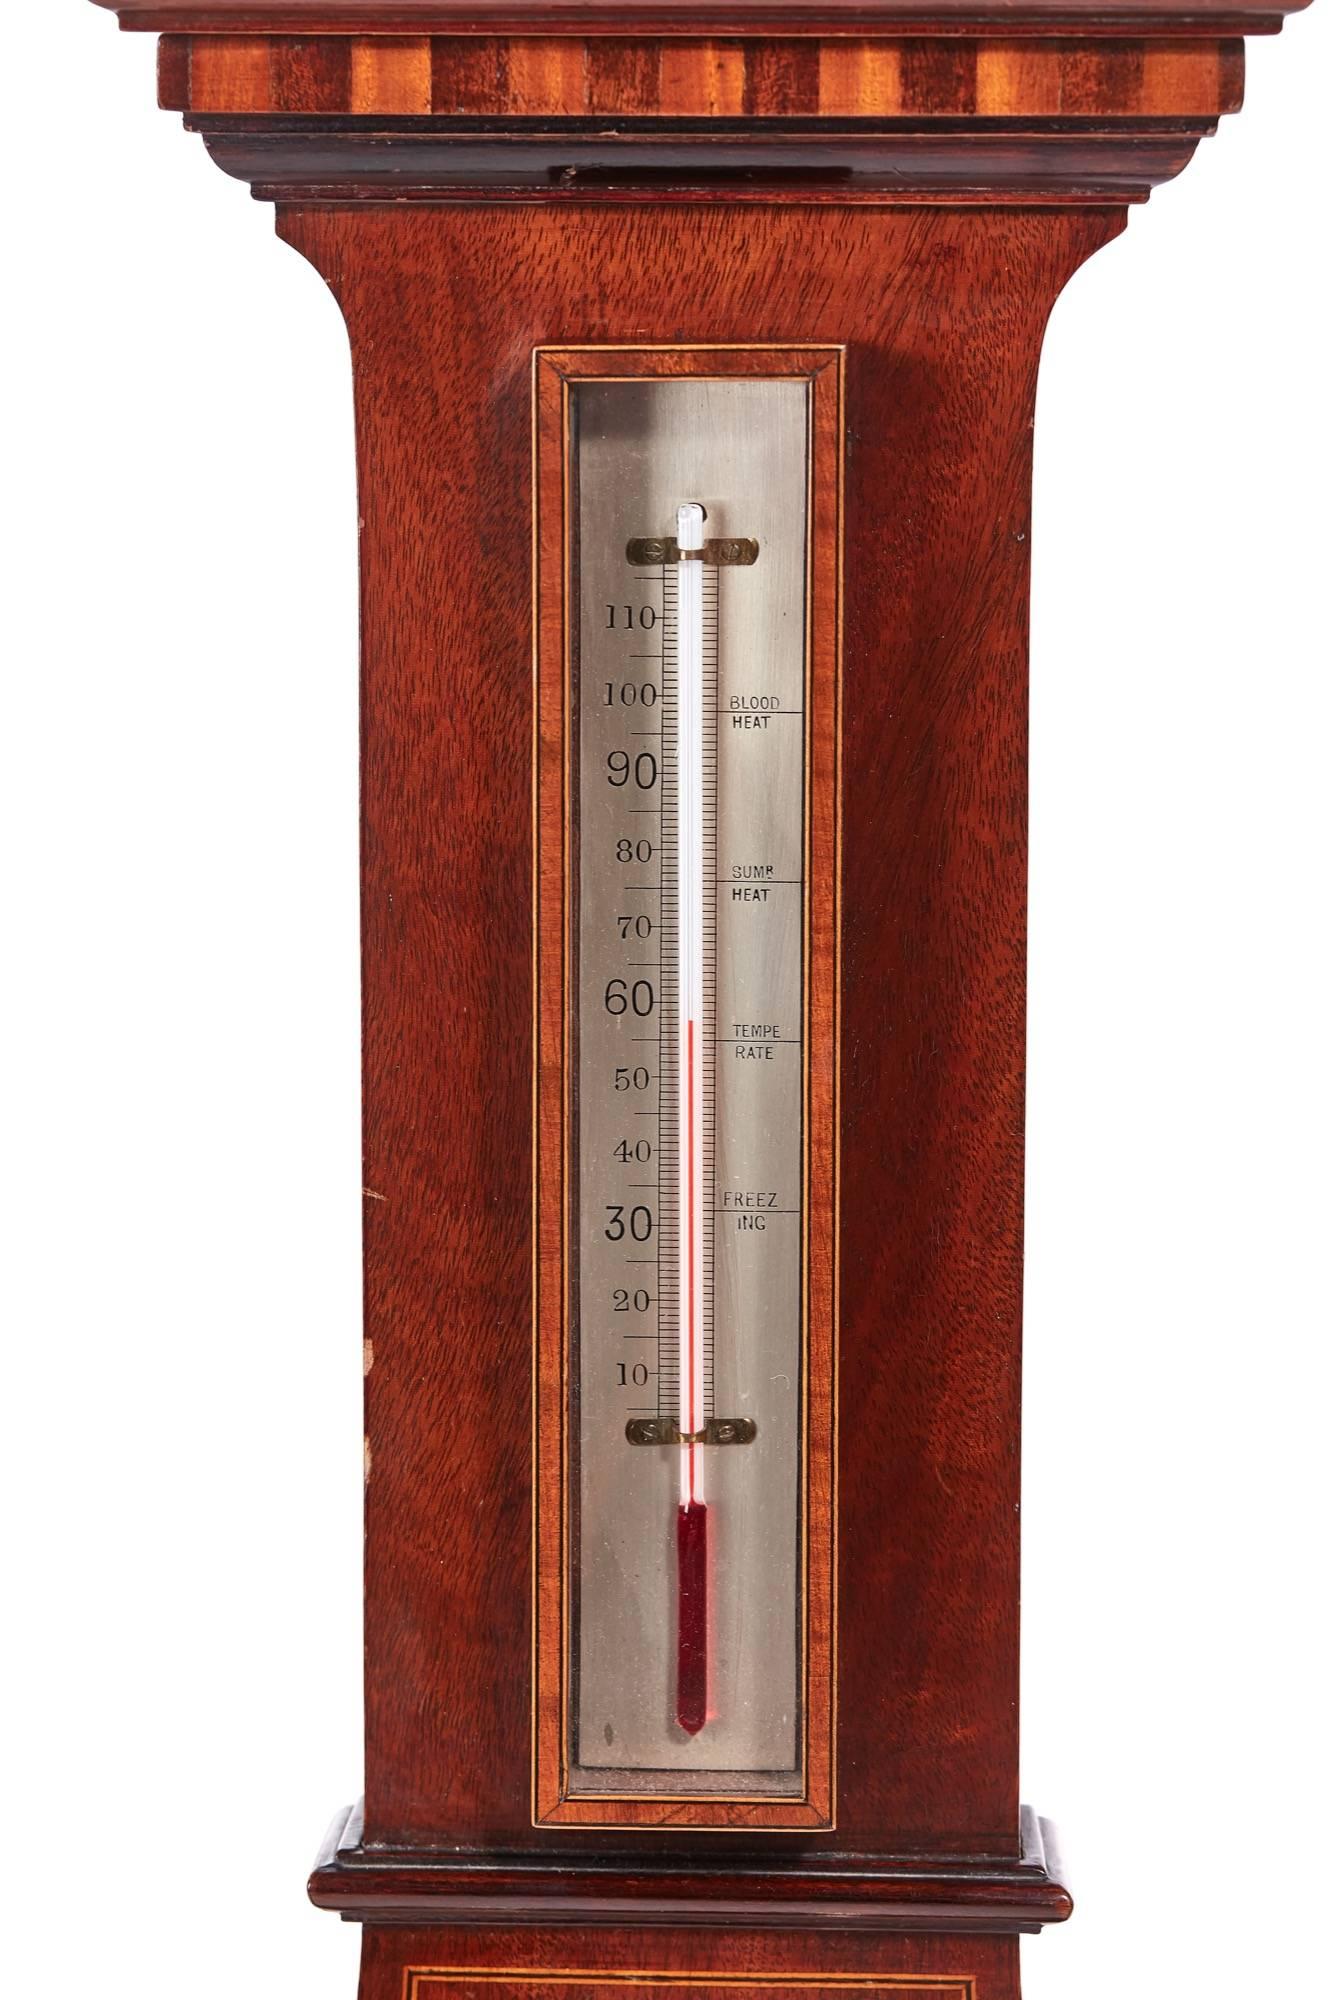 Large antique mahogany inlaid barometer, with a shaped inlaid pediment, lovely satinwood inlay to the case, thermometer and a silver dial
Working order
Lovely color and condition
Measures: 12